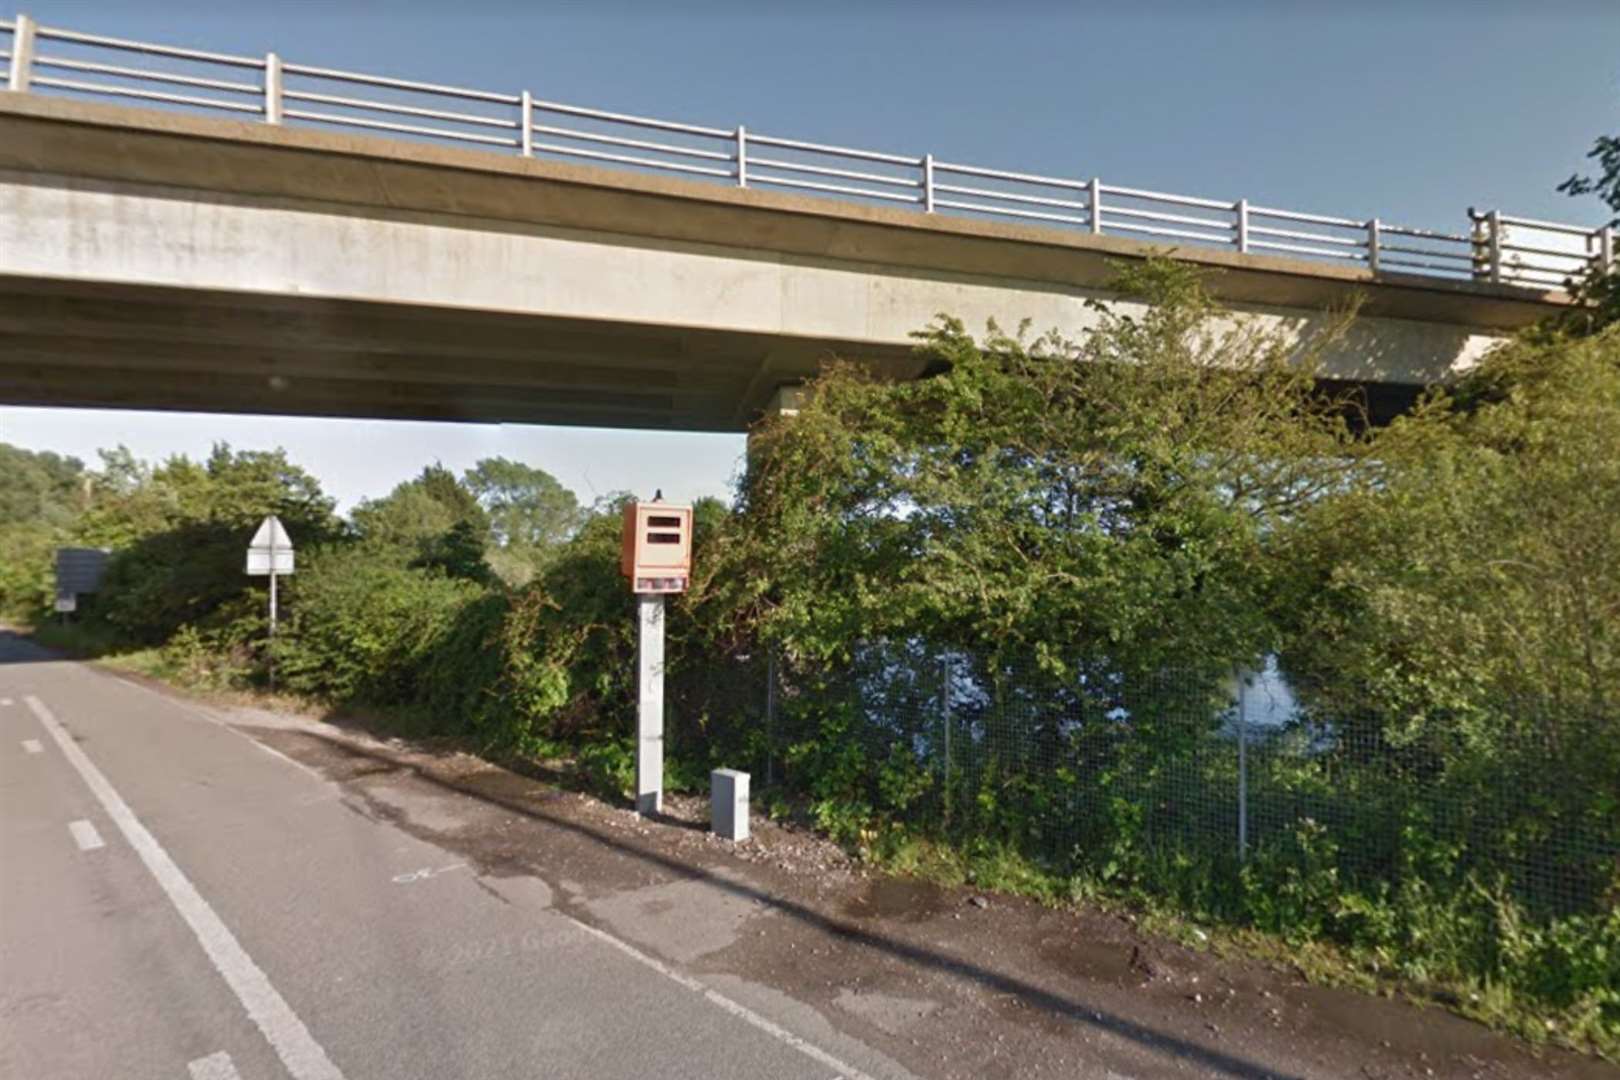 The car was stopped in Richborough Road. Picture: Google Maps